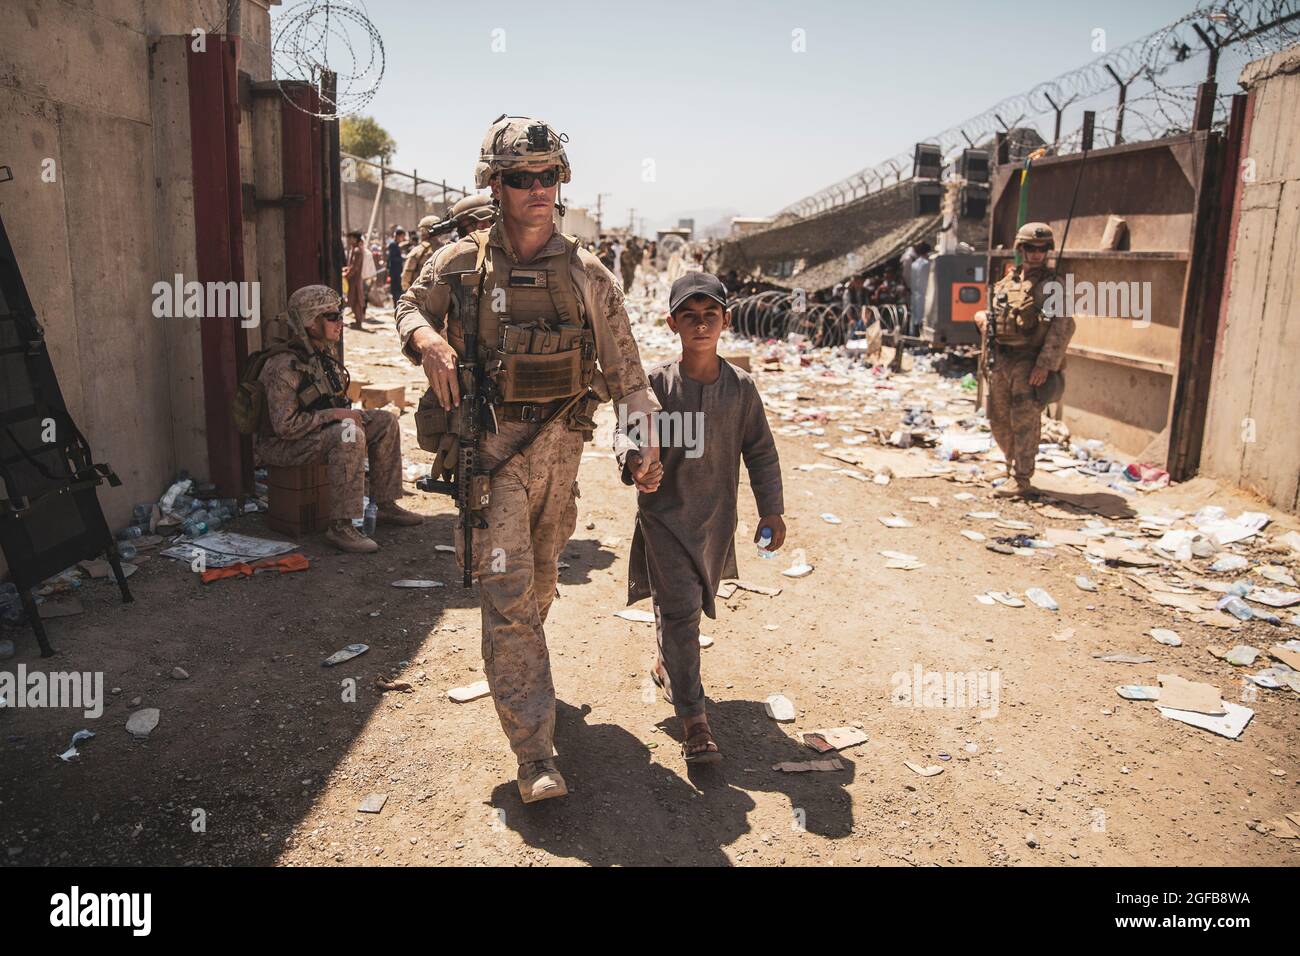 A U.S. Marine with the Special Purpose Marine Air-Ground Task Force-Crisis Response-Central Command (SPMAGTF-CR-CC) escorts a kid to his family during an evacuation at Hamid Karzai International Airport, Kabul, Afghanistan, Aug. 24. U.S. service members and coalition forces are assisting the Department of State with a non-combatant evacuation operation (NEO) in Afghanistan. (U.S. Marine Corps photo by Staff Sgt. Victor Mancilla) Stock Photo